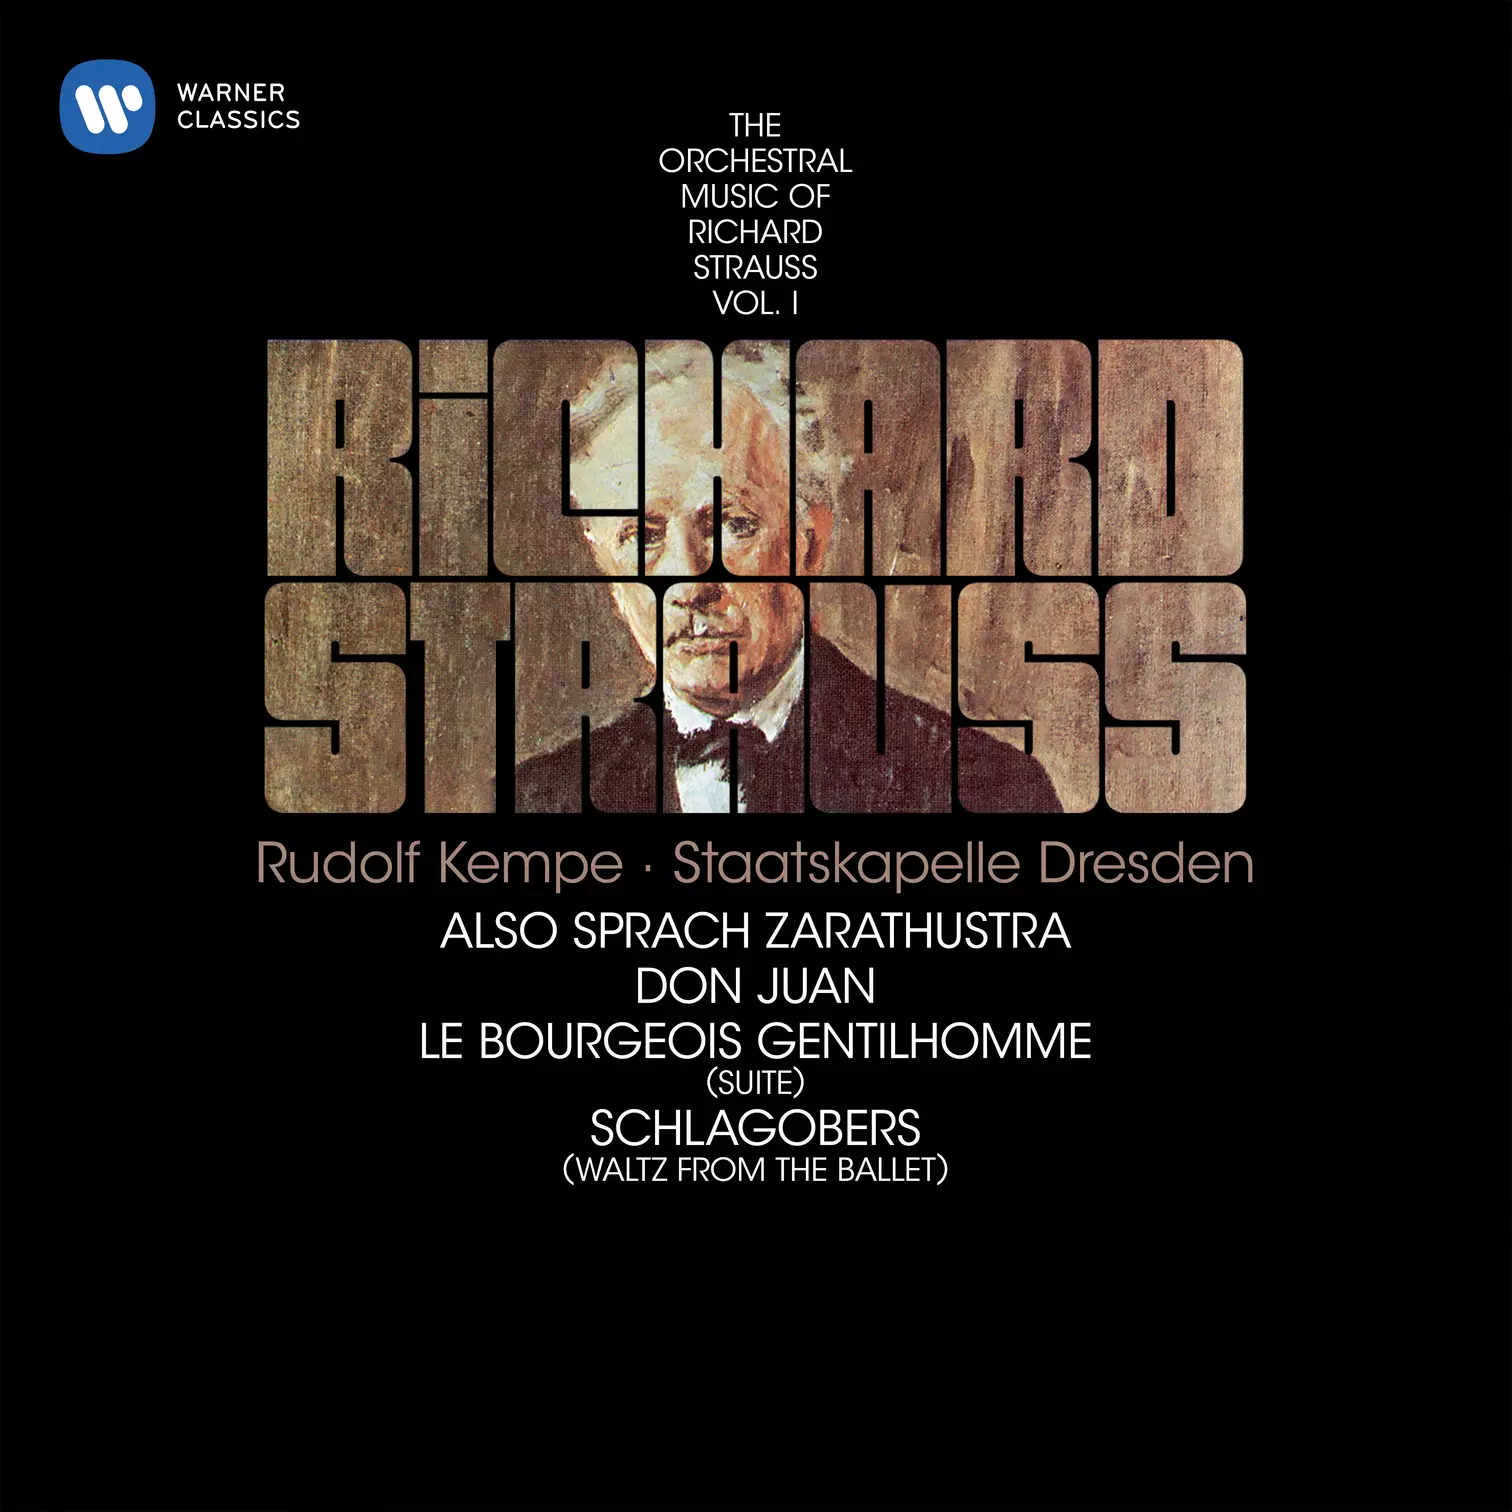 Strauss: Also sprach Zarathustra, Don Juan & Suite from Le bourgeois gentilhomme